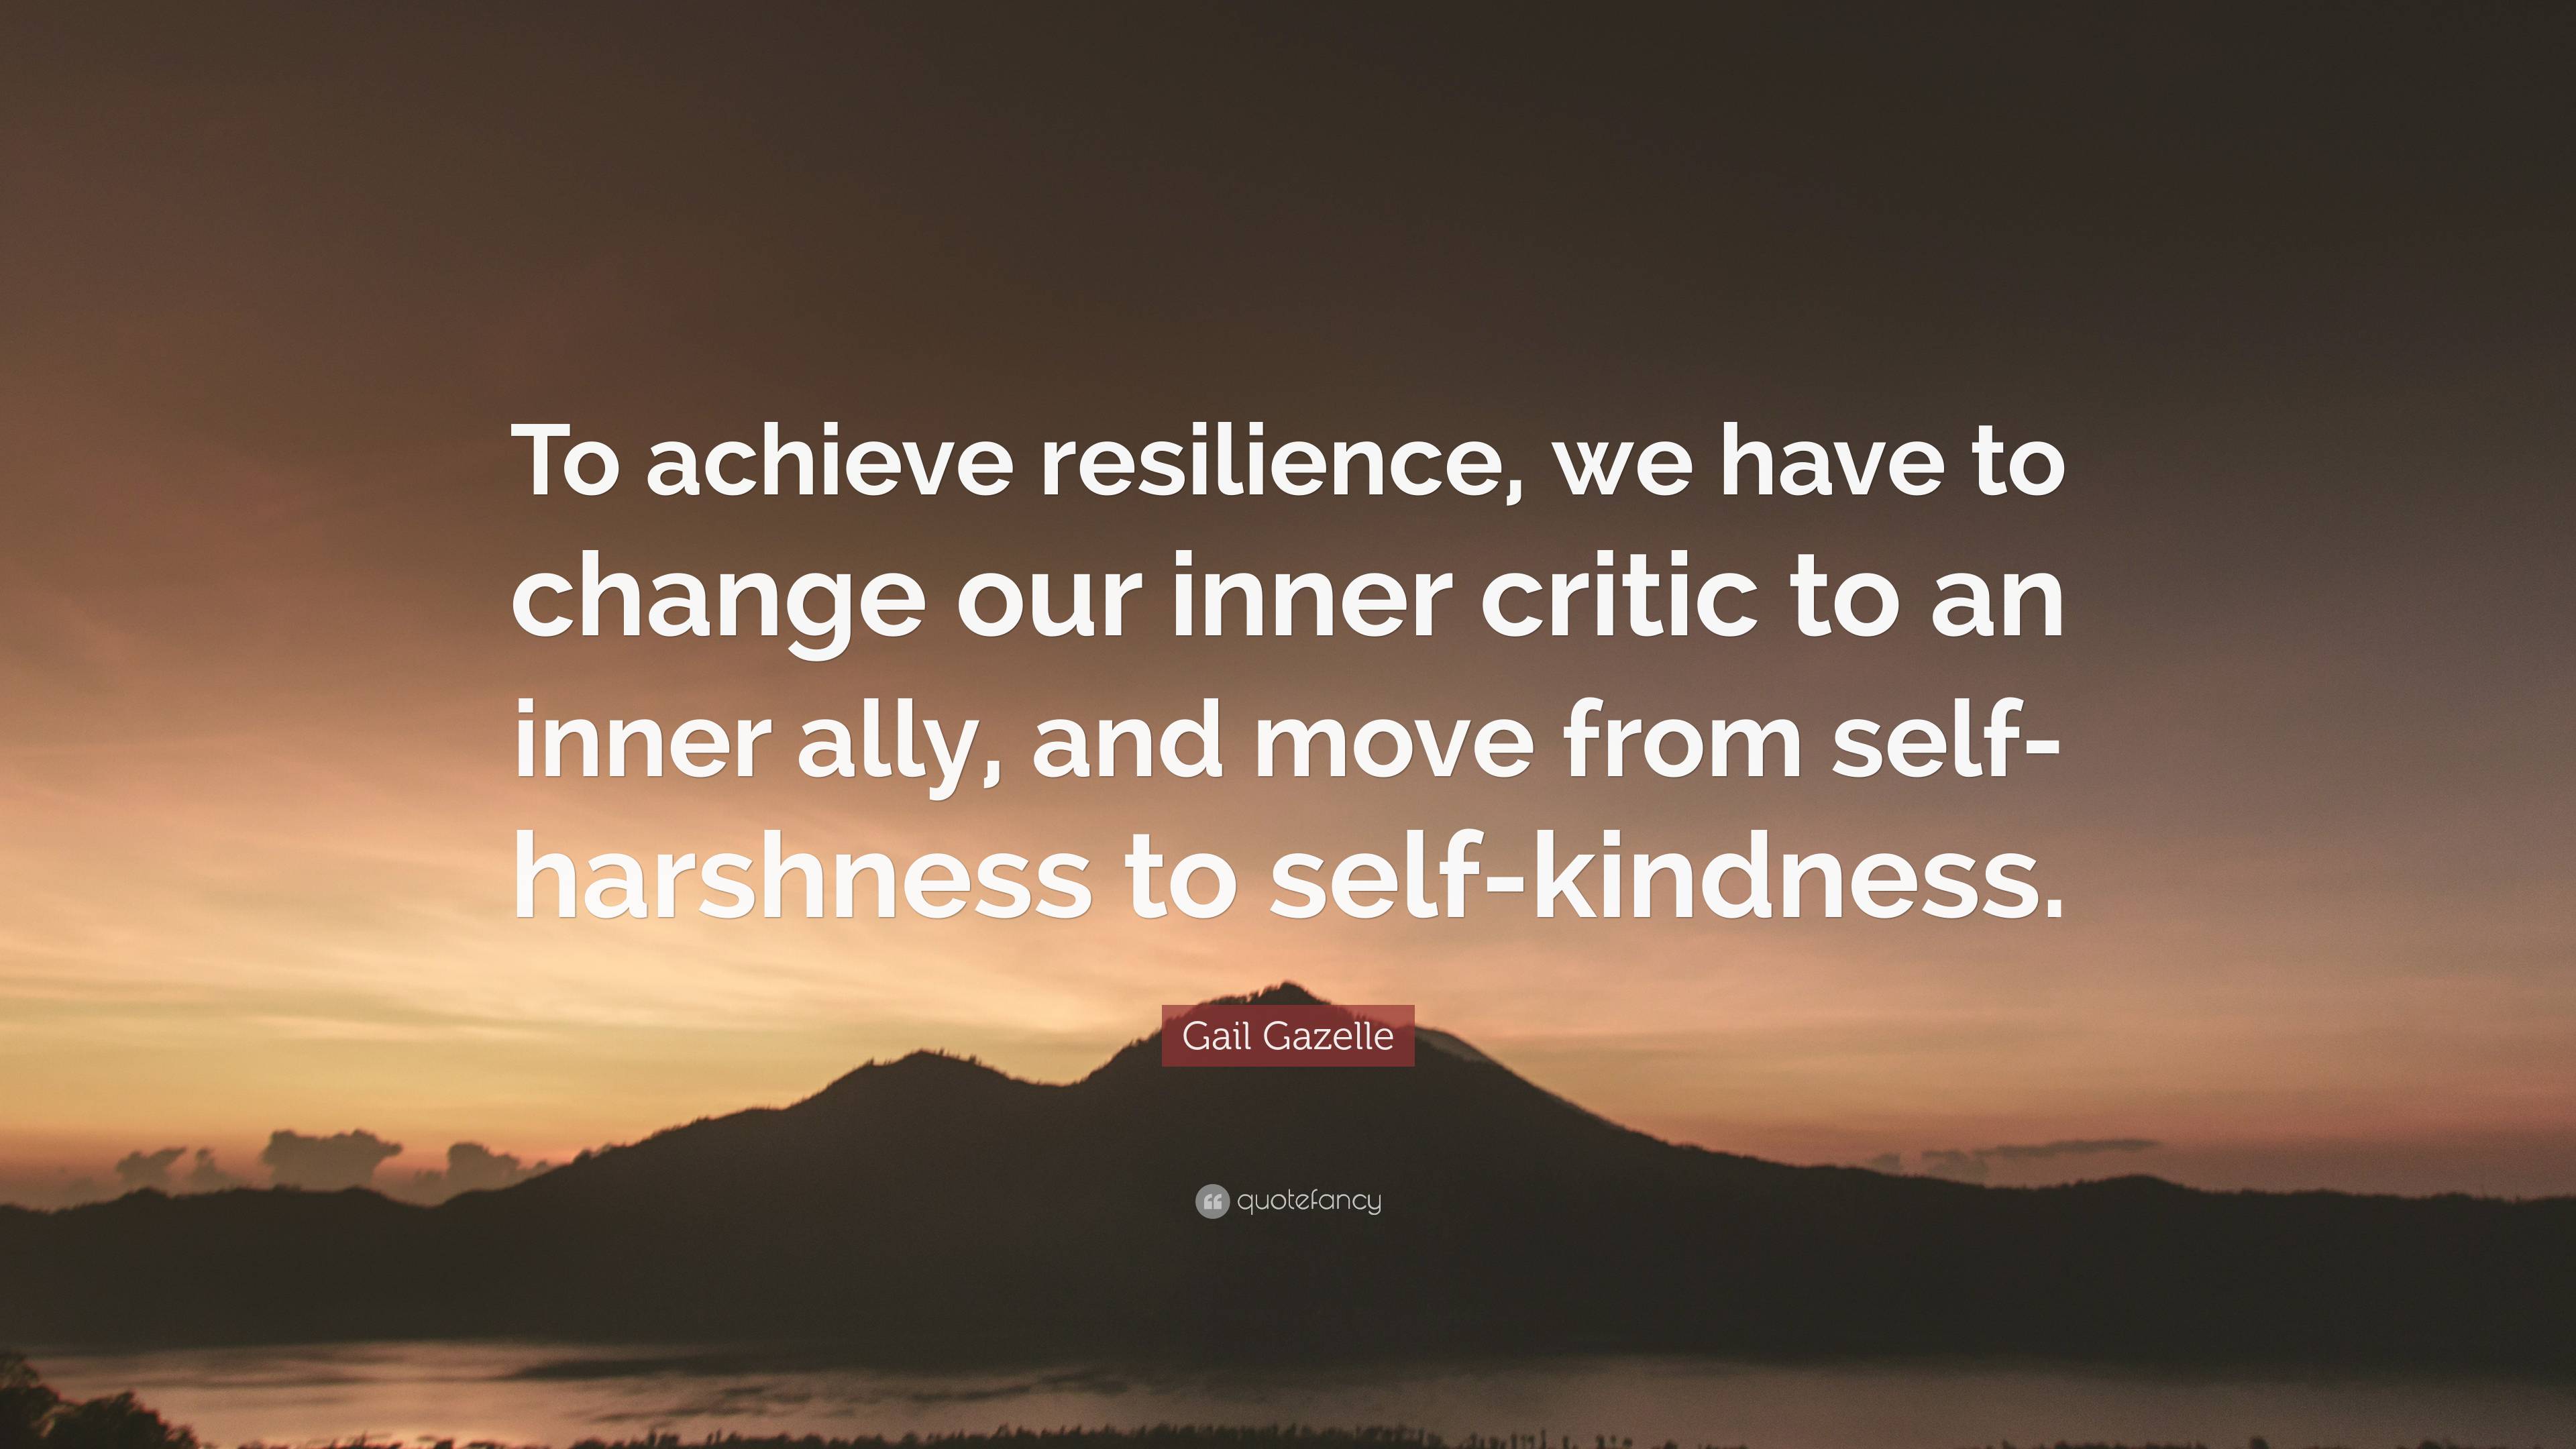 Gail Gazelle Quote: “To achieve resilience, we have to change our inner ...